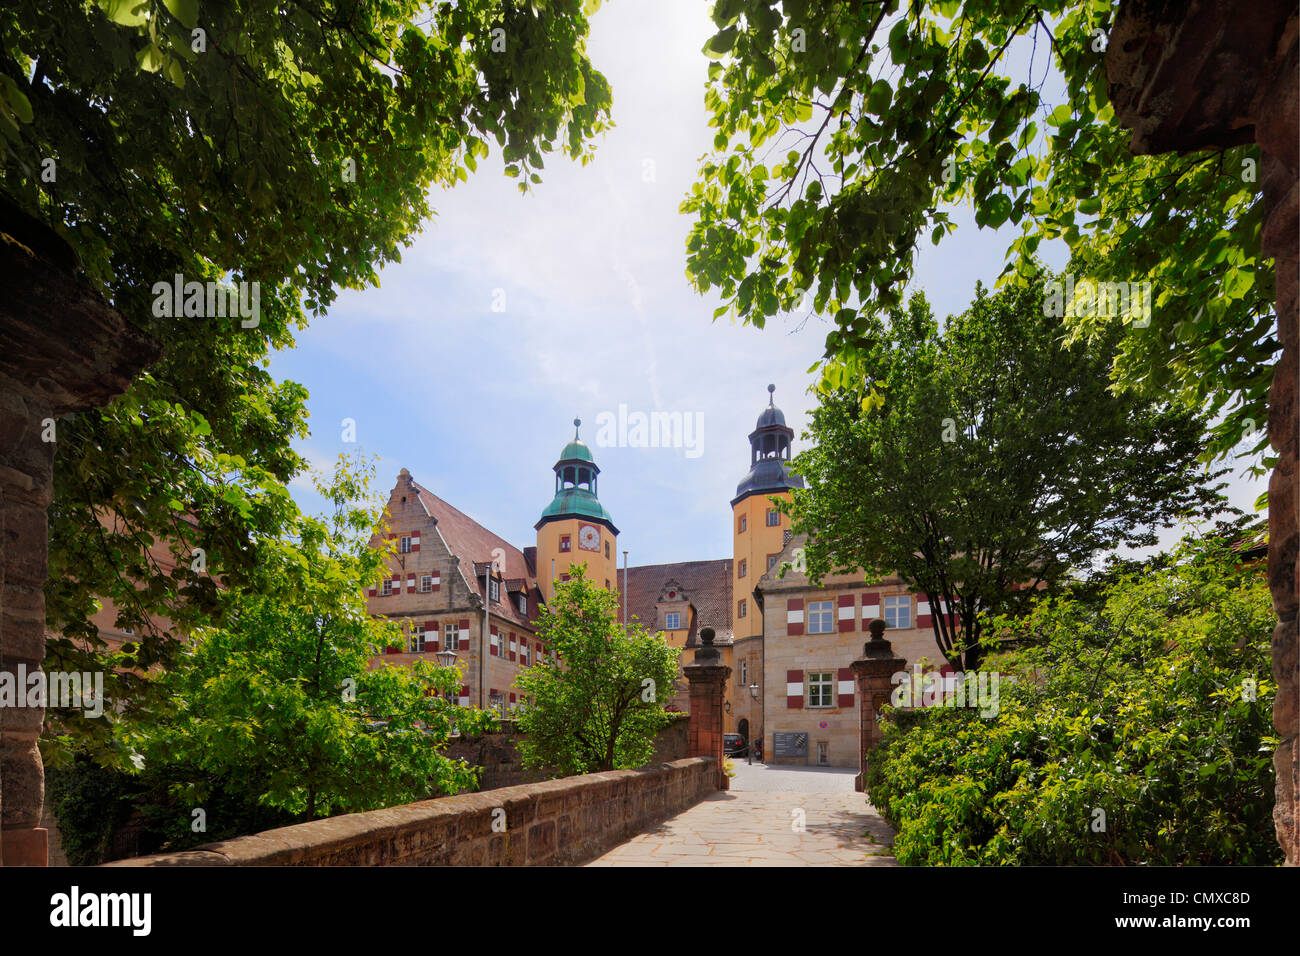 Germany, Bavaria, Franconia, Middle Franconia, View of Hersbruck Castle Stock Photo